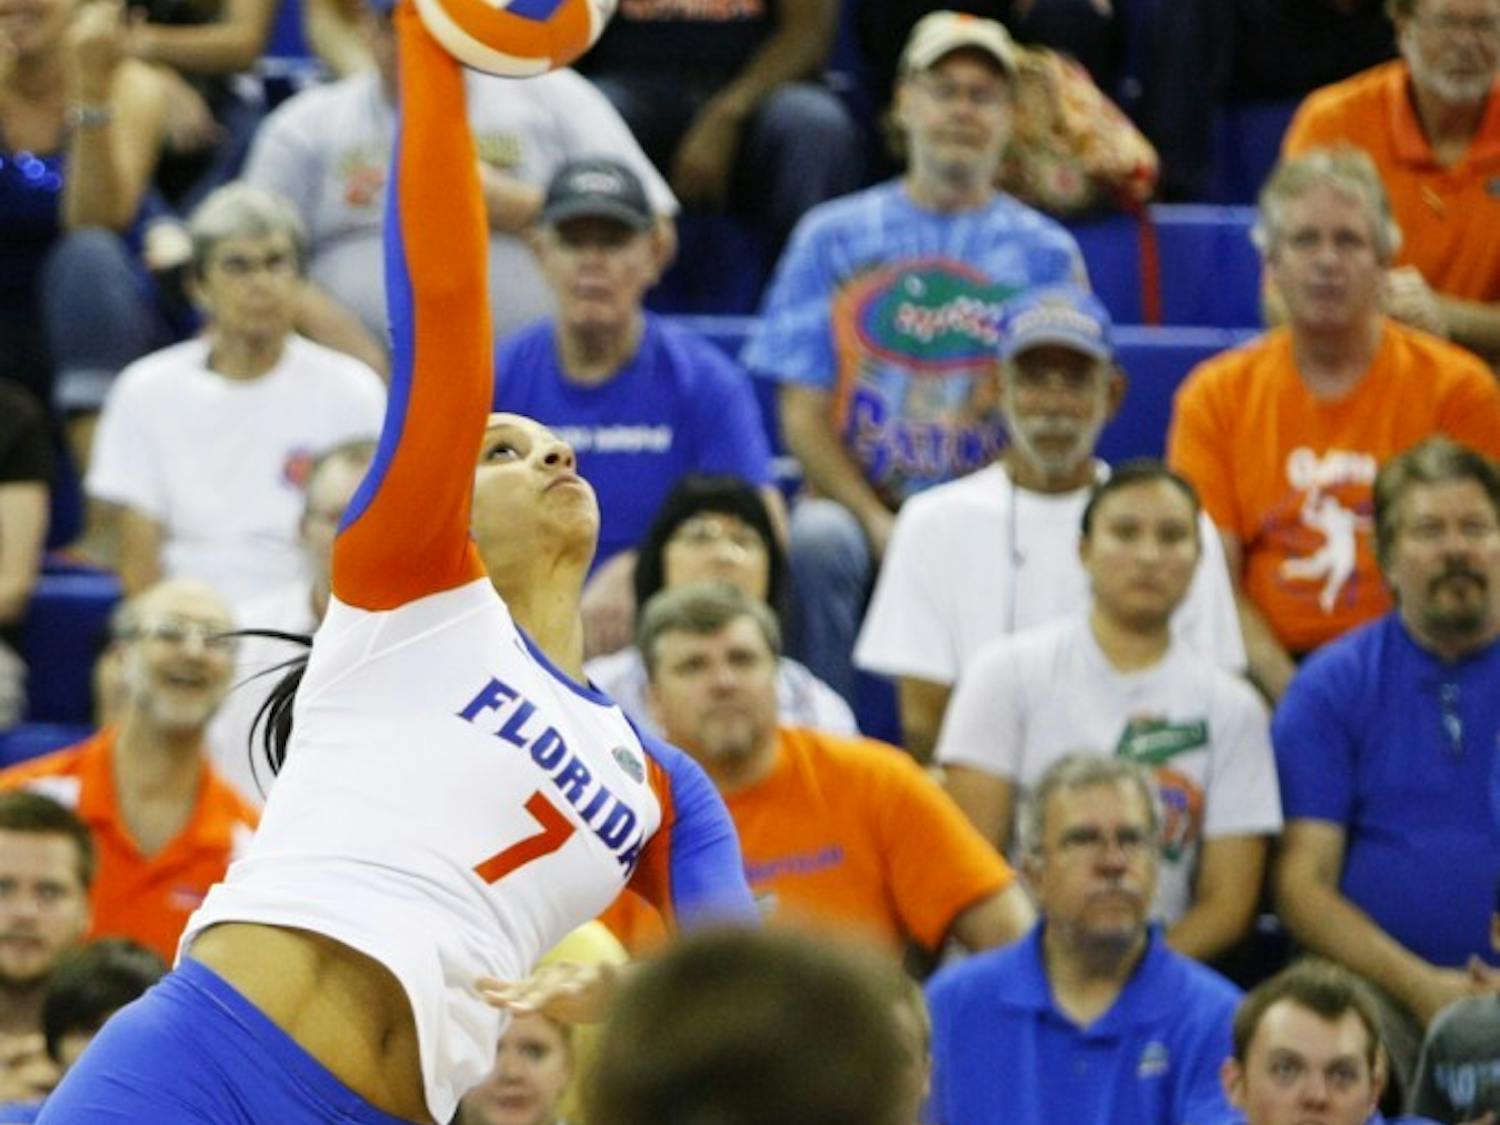 Freshman Gabby Mallette serves during Florida’s 3-0 win against Arkansas on Friday in the O’Connell Center. Mallette notched two blocks against the Razorbacks and leads Gators freshmen with 23 this season.&nbsp;
